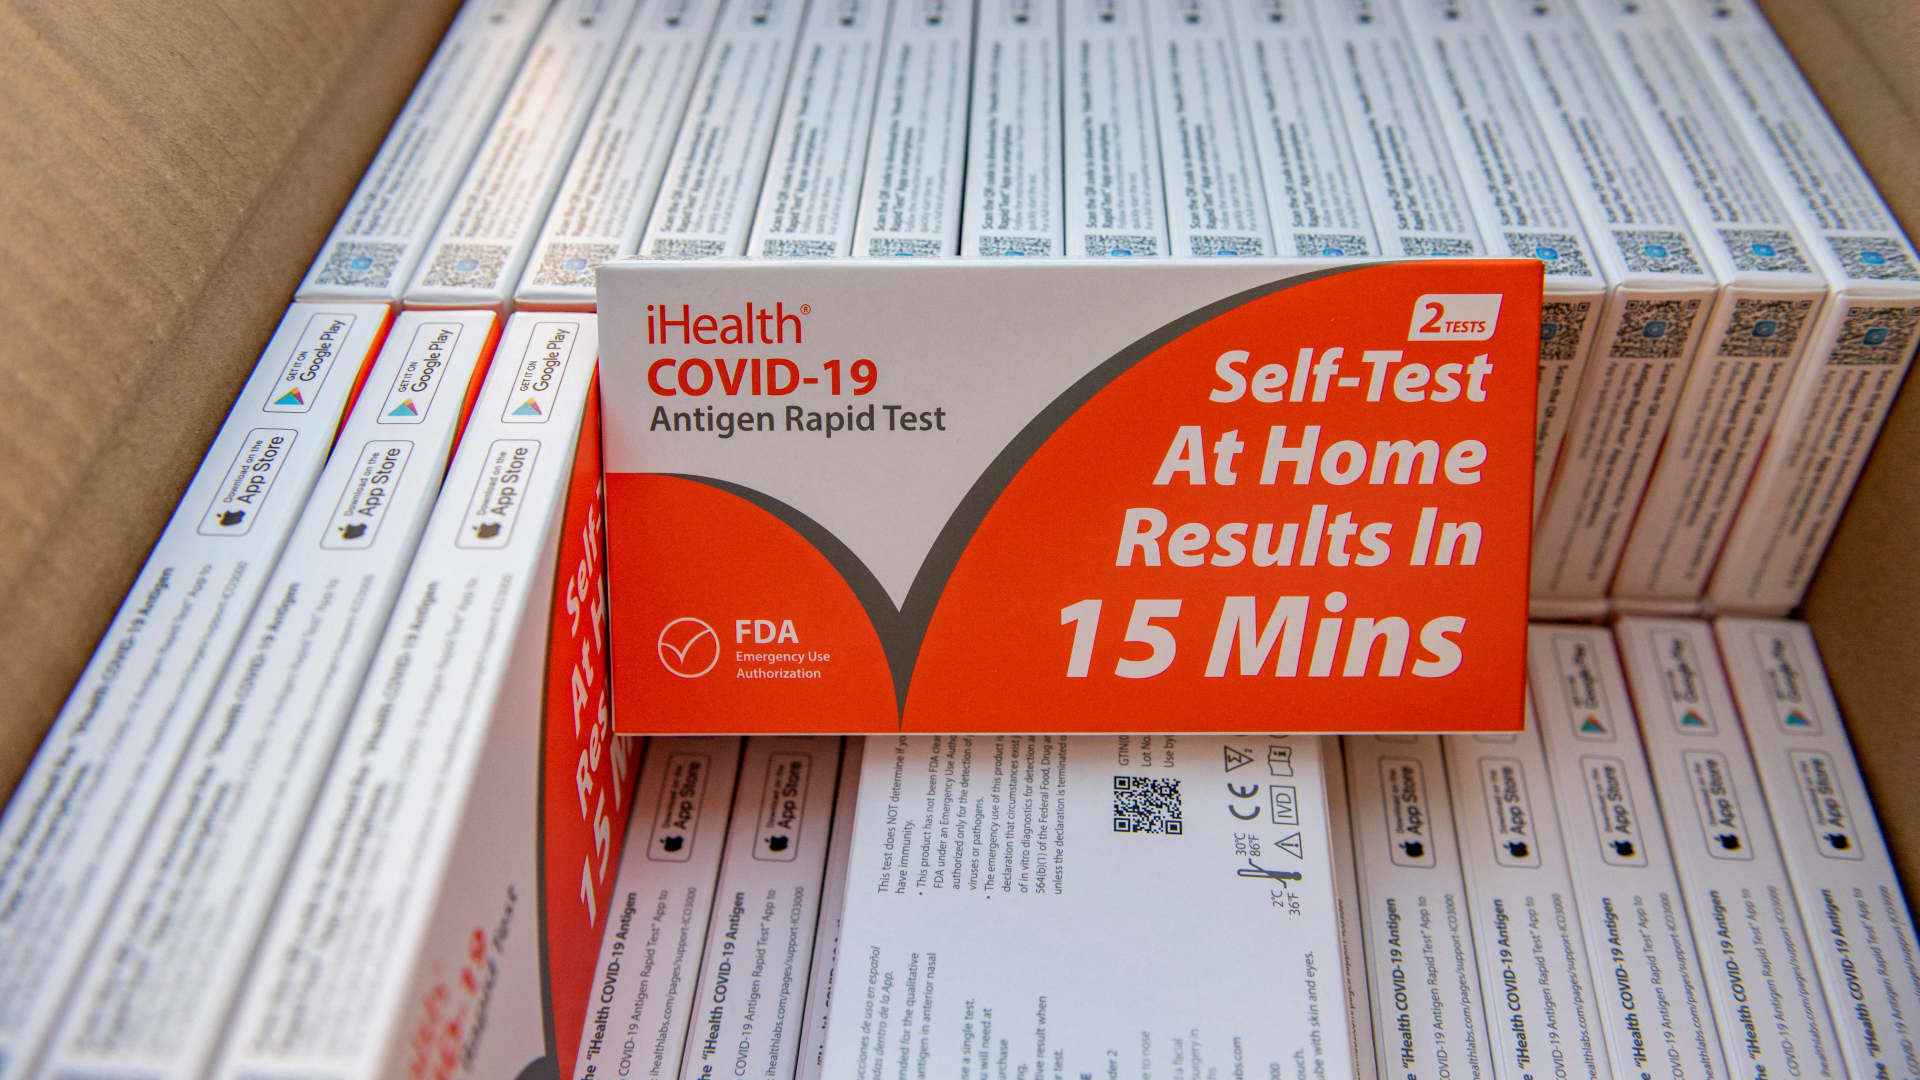 Rapid at-home Covid-19 test kits are ready to be distributed at the Chelsea Community Connections in Chelsea, Massachusetts on December 17, 2021.